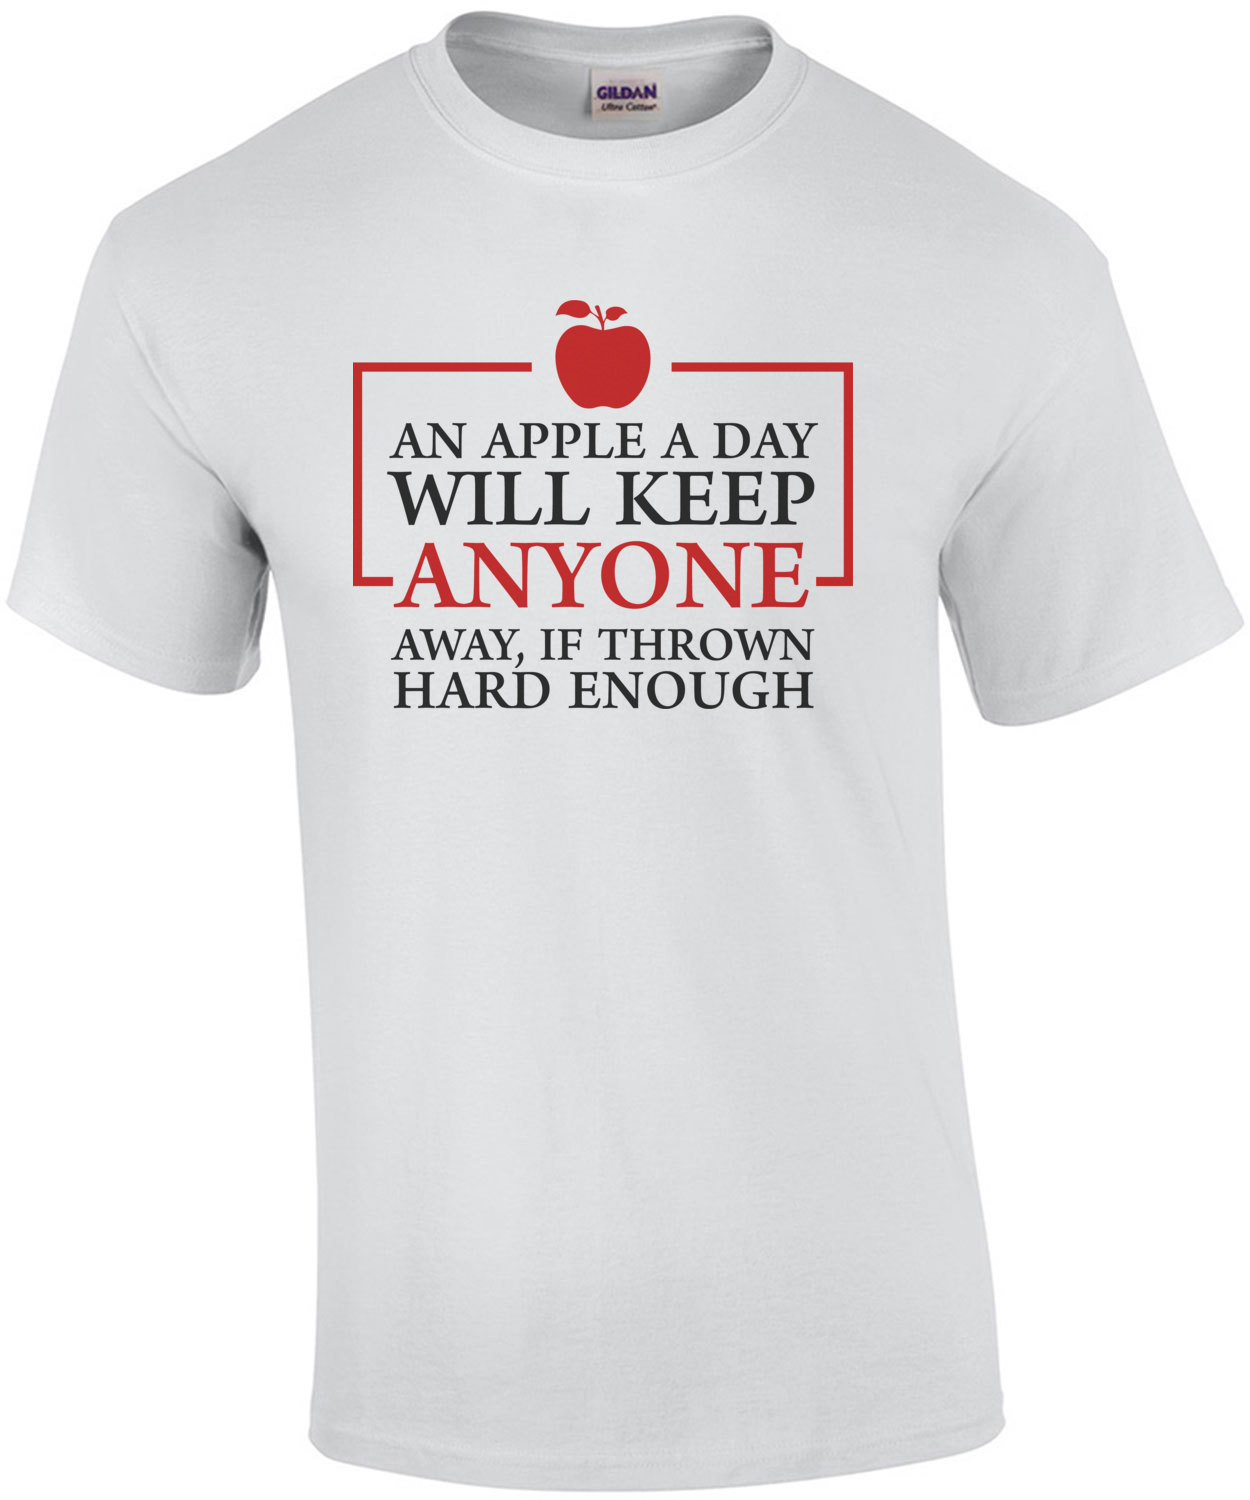 An apple a day will keep anyone away if thrown hard enough - Funny T-Shirt